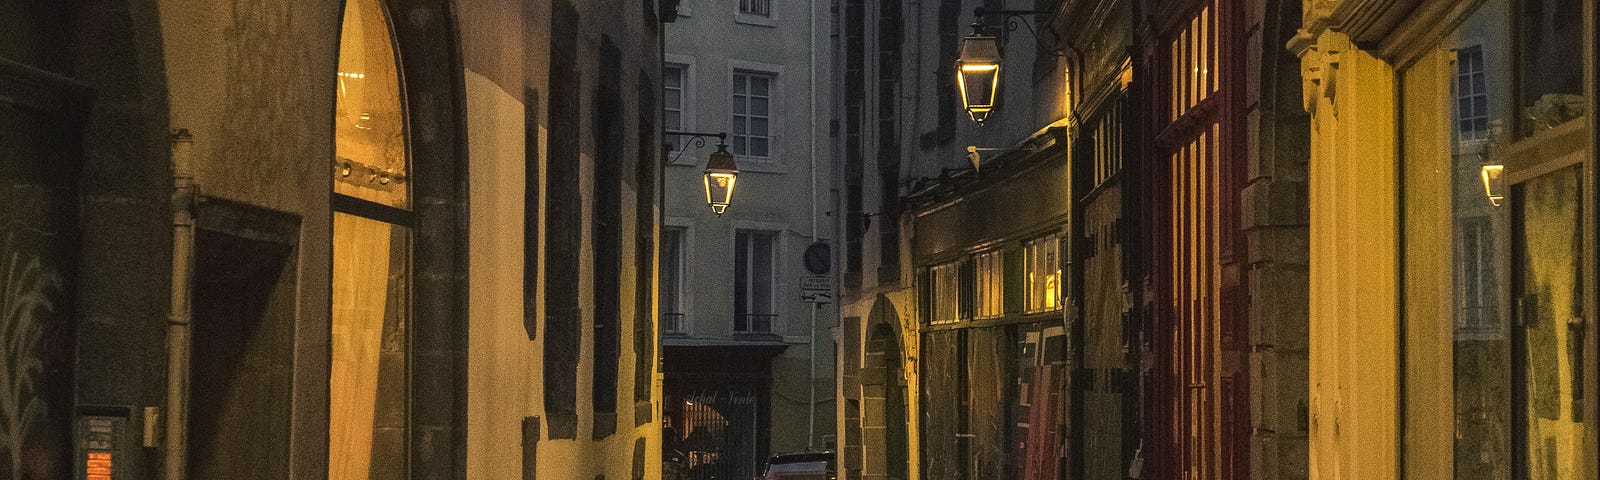 Photo of a lane in the evening.